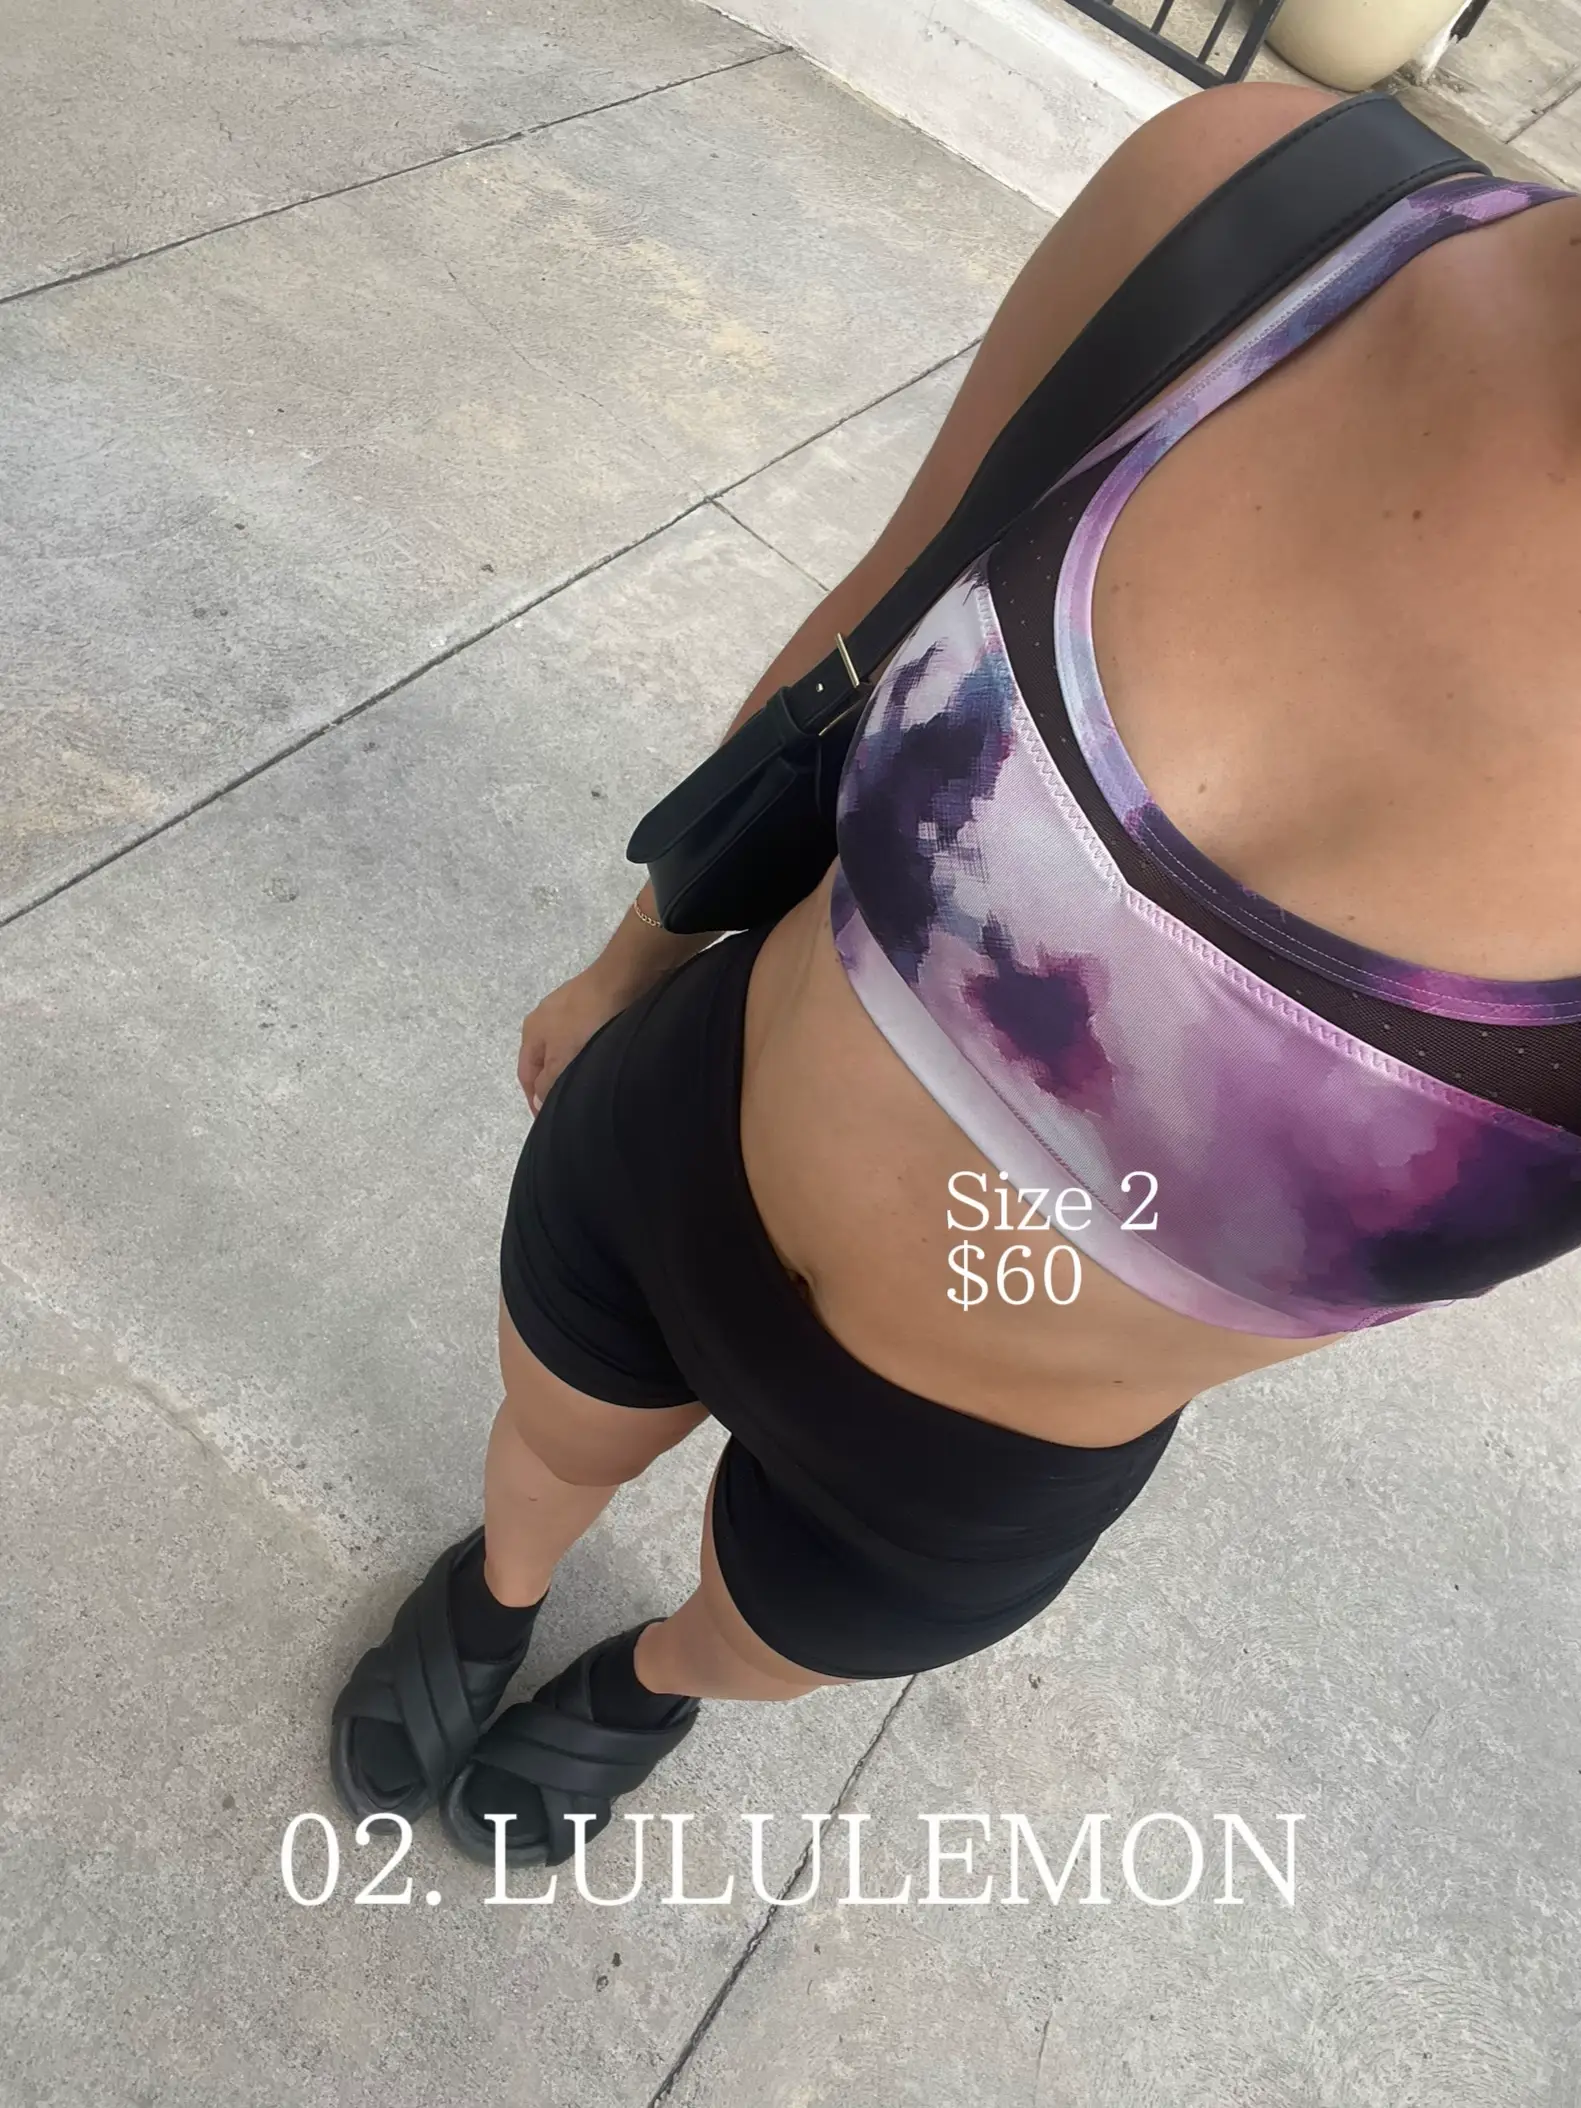 My favorite sports bra for HIIT workouts 🏃🏼‍♀️